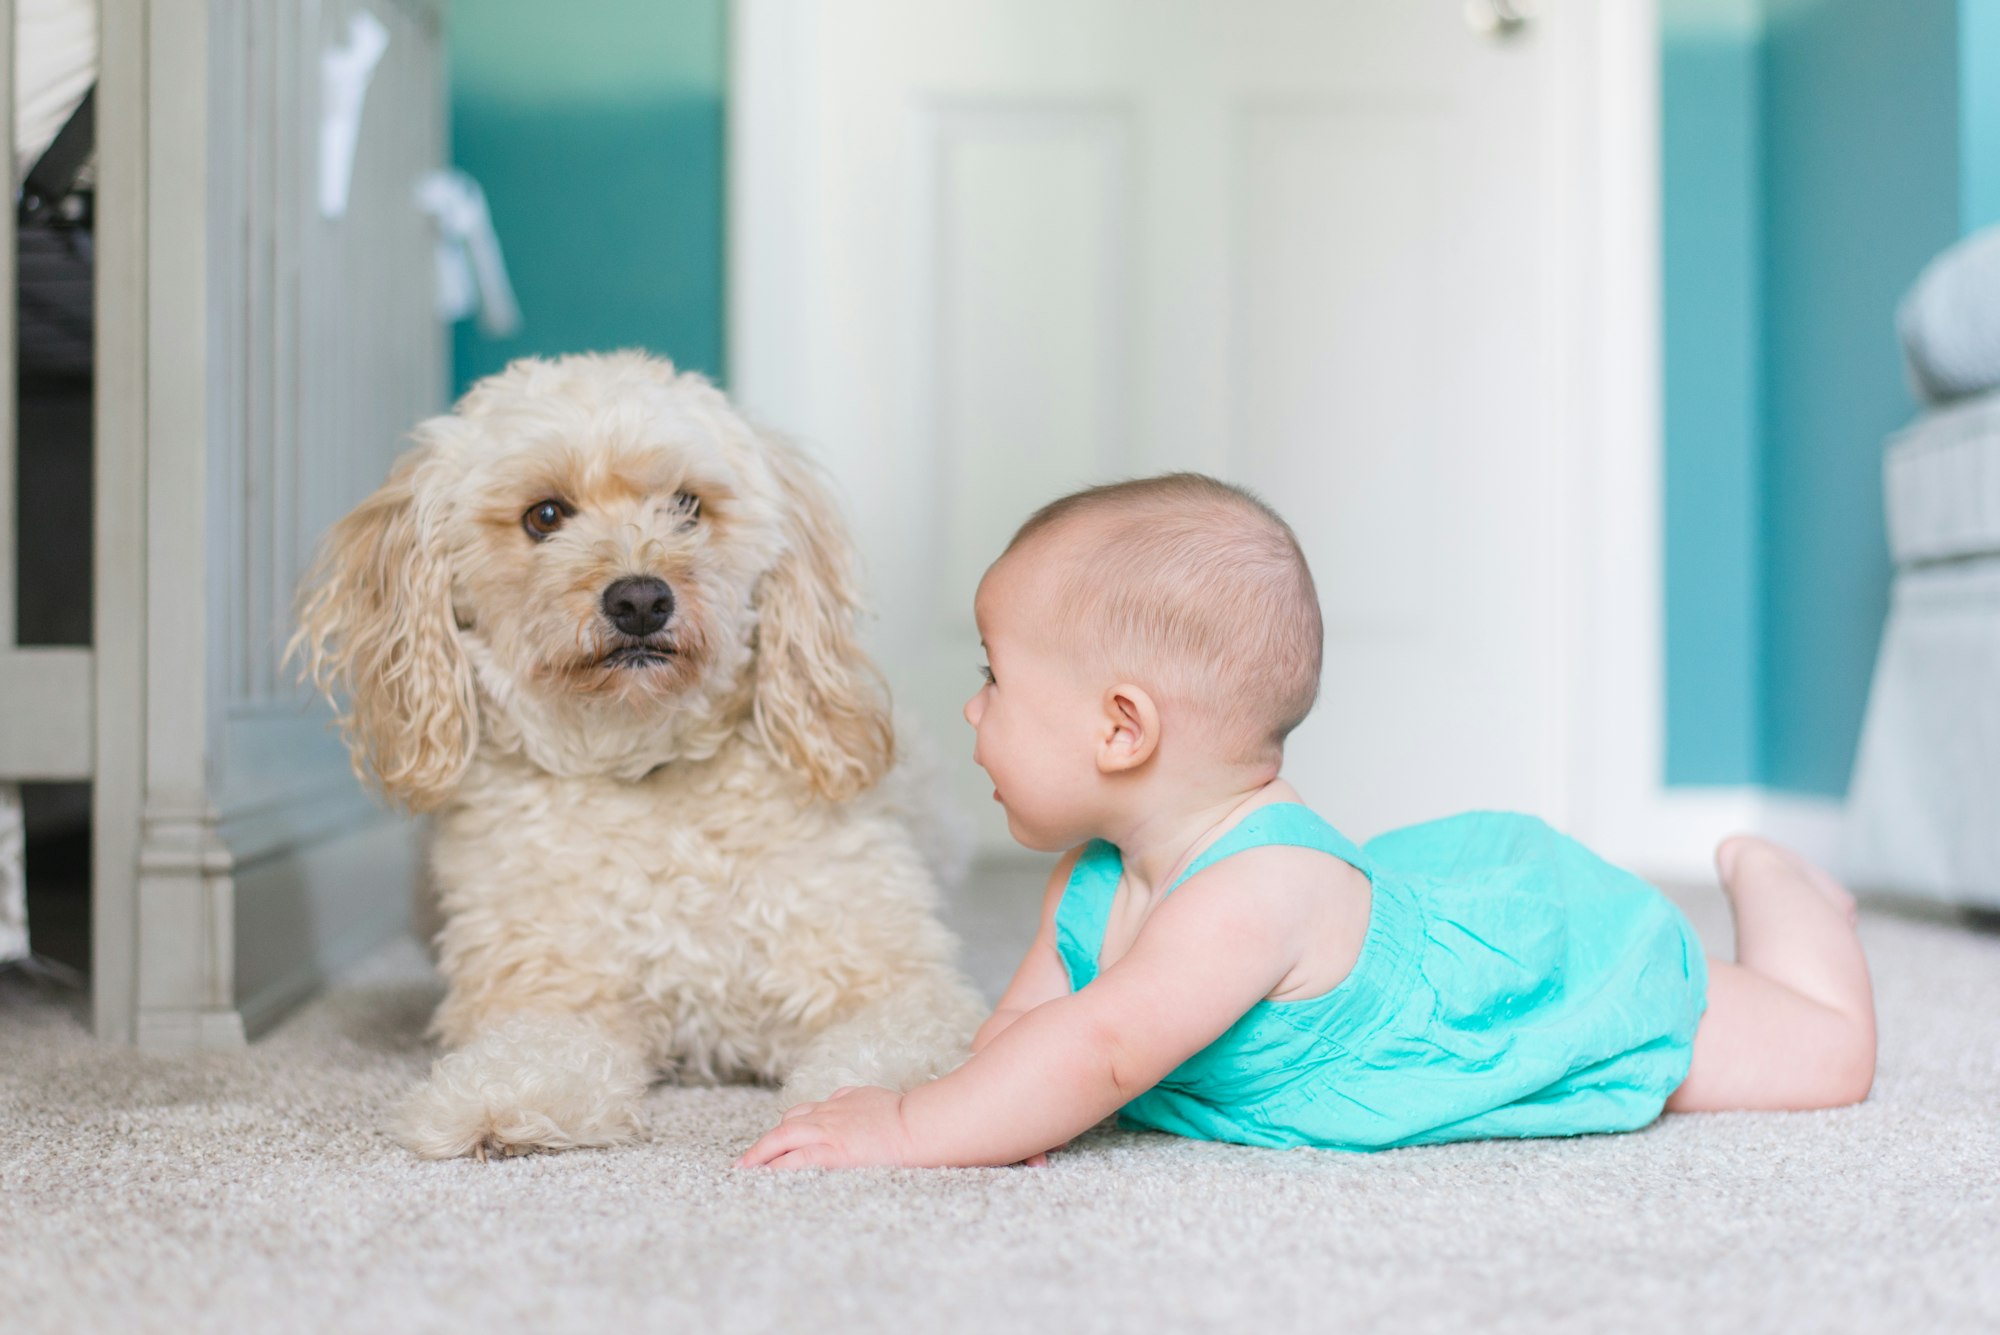 A baby girl playing with a dog inside the bedroom